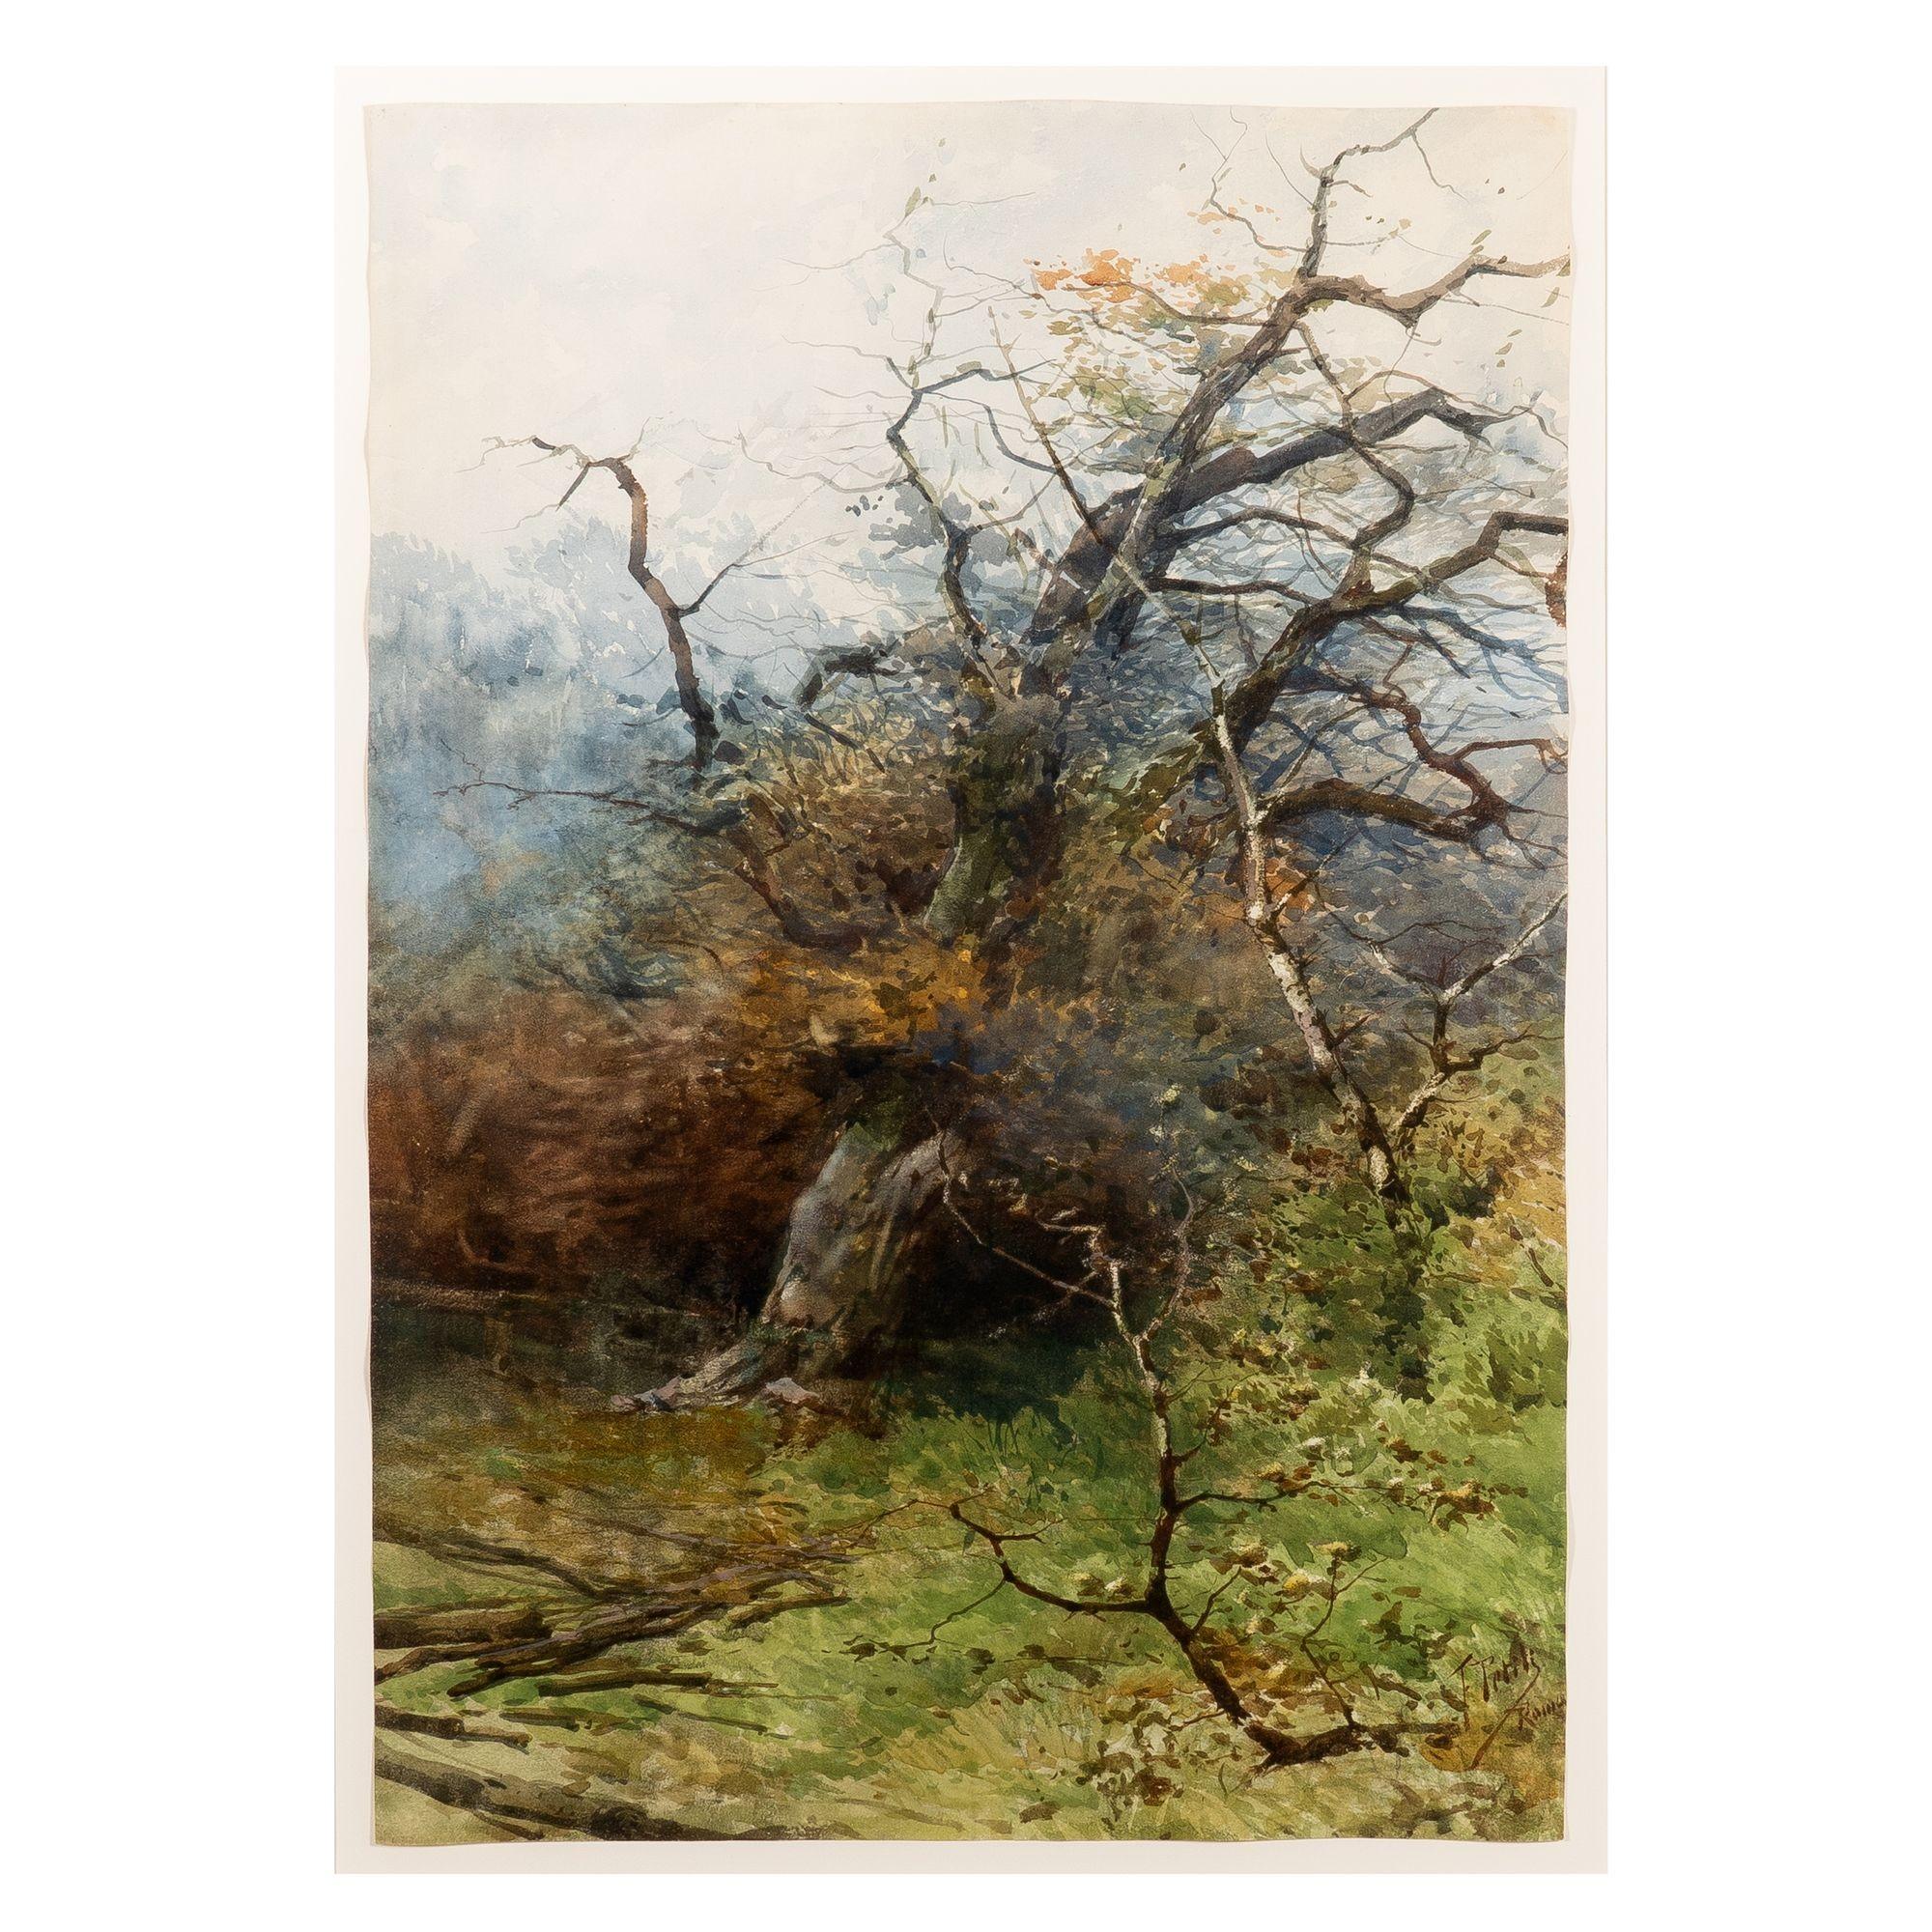 Roman forest landscape, rendered in watercolor on laid paper. The work has received archival treatment, including de-acidification from the acid transfer of pulp matting. Float mounted on archival mat with deep bevel under UV filtering plexiglass.